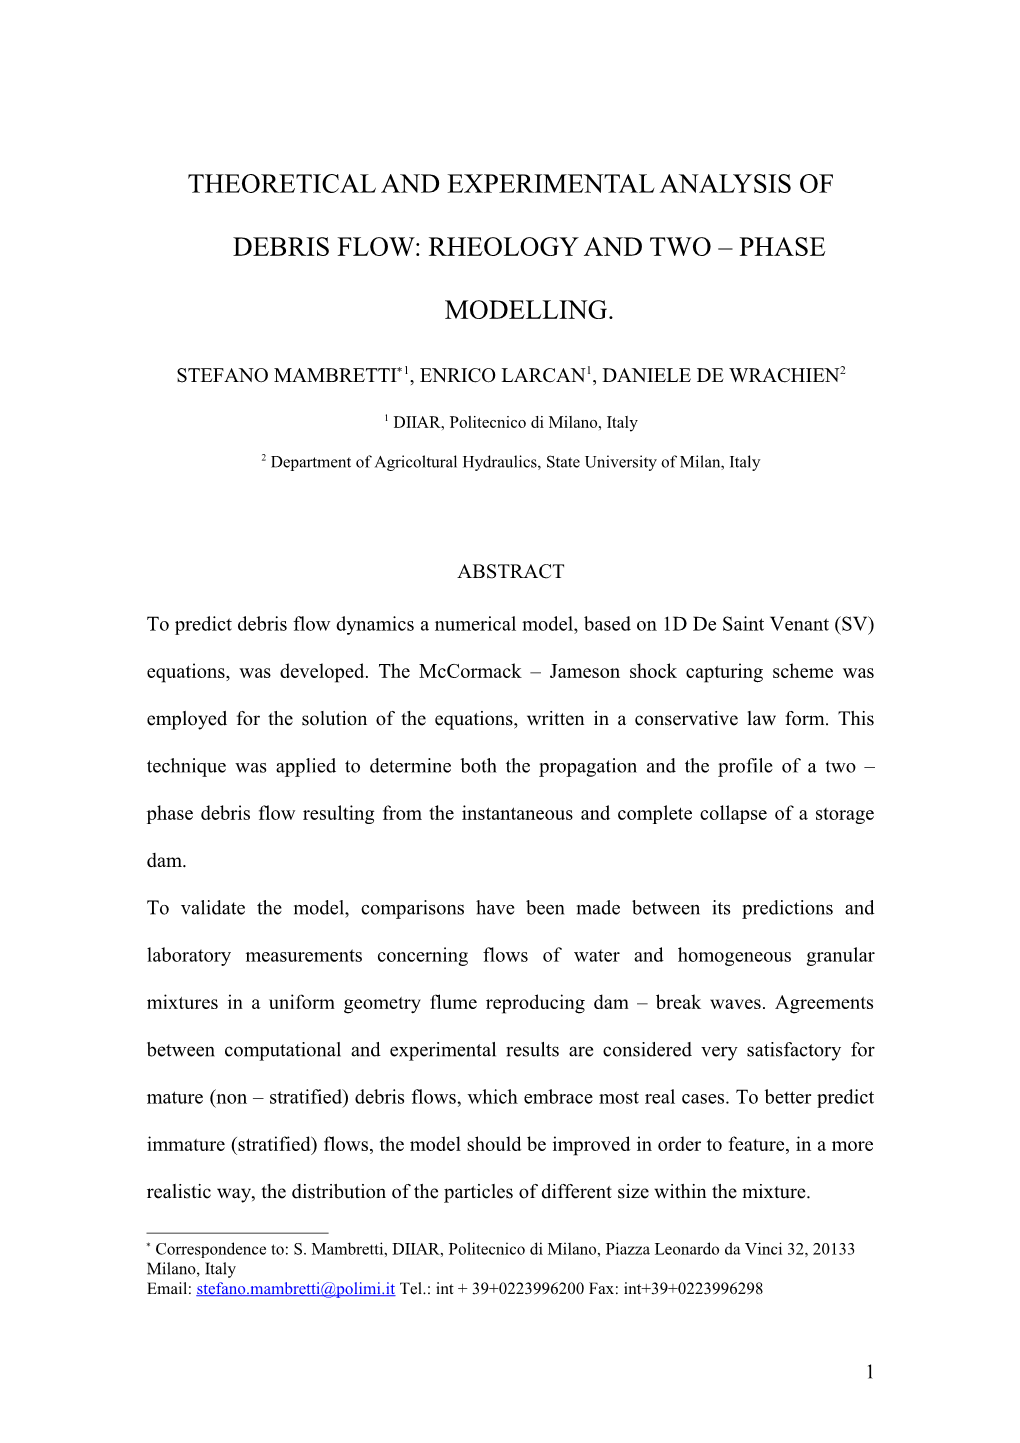 Theoretical and Experimental Analysis of Debris Flow Rheology and Two Phase Modelling